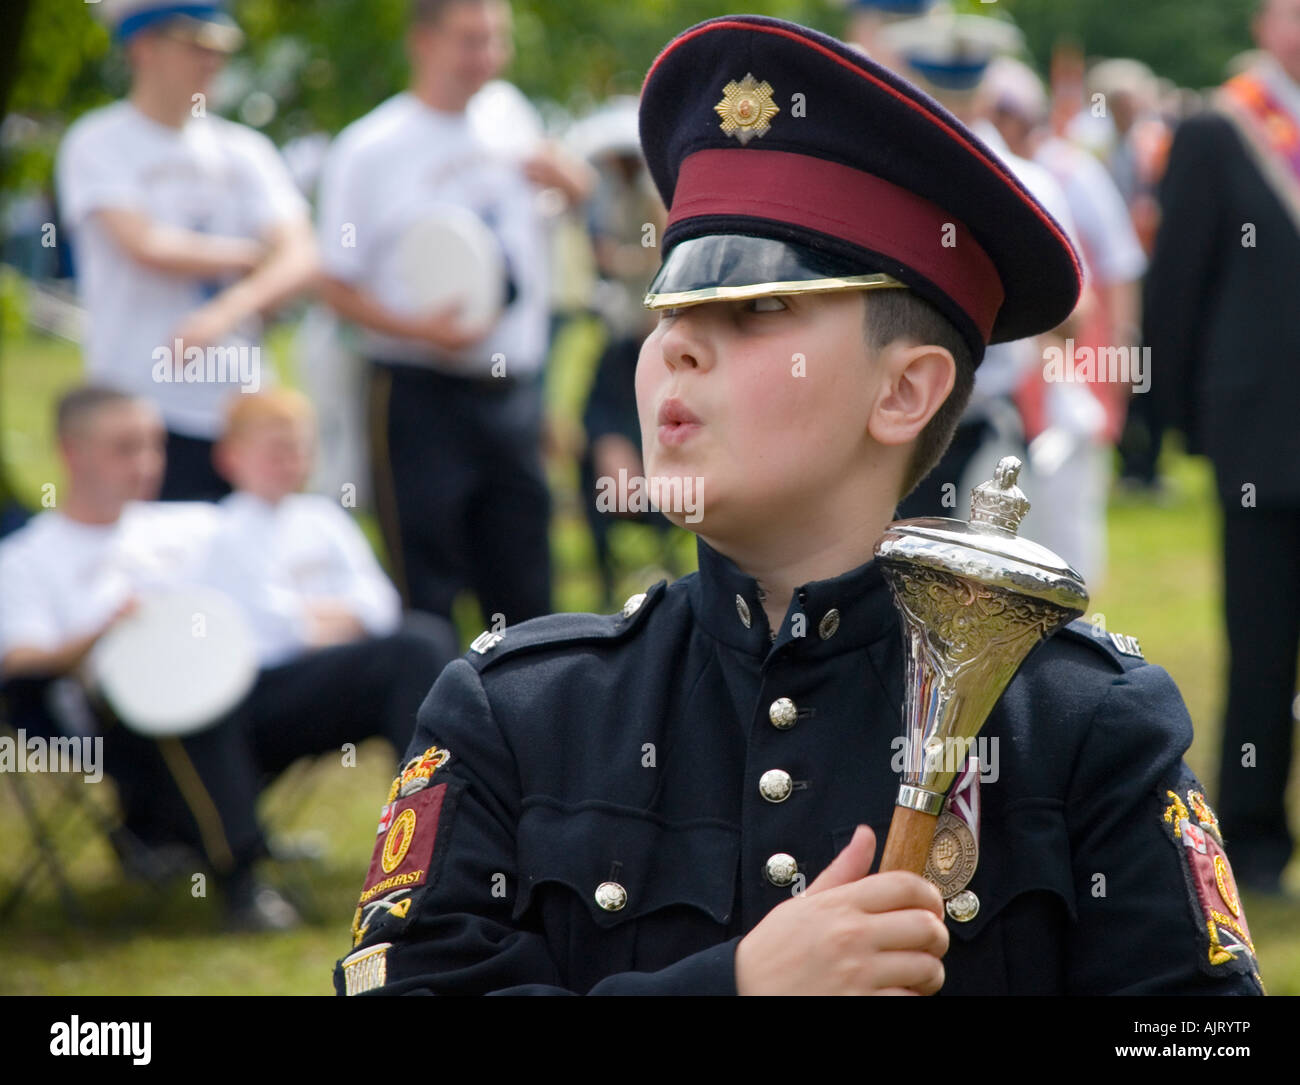 Whistling Band Major at 'The Field' during the Orange Order parade day on 12th July Stock Photo